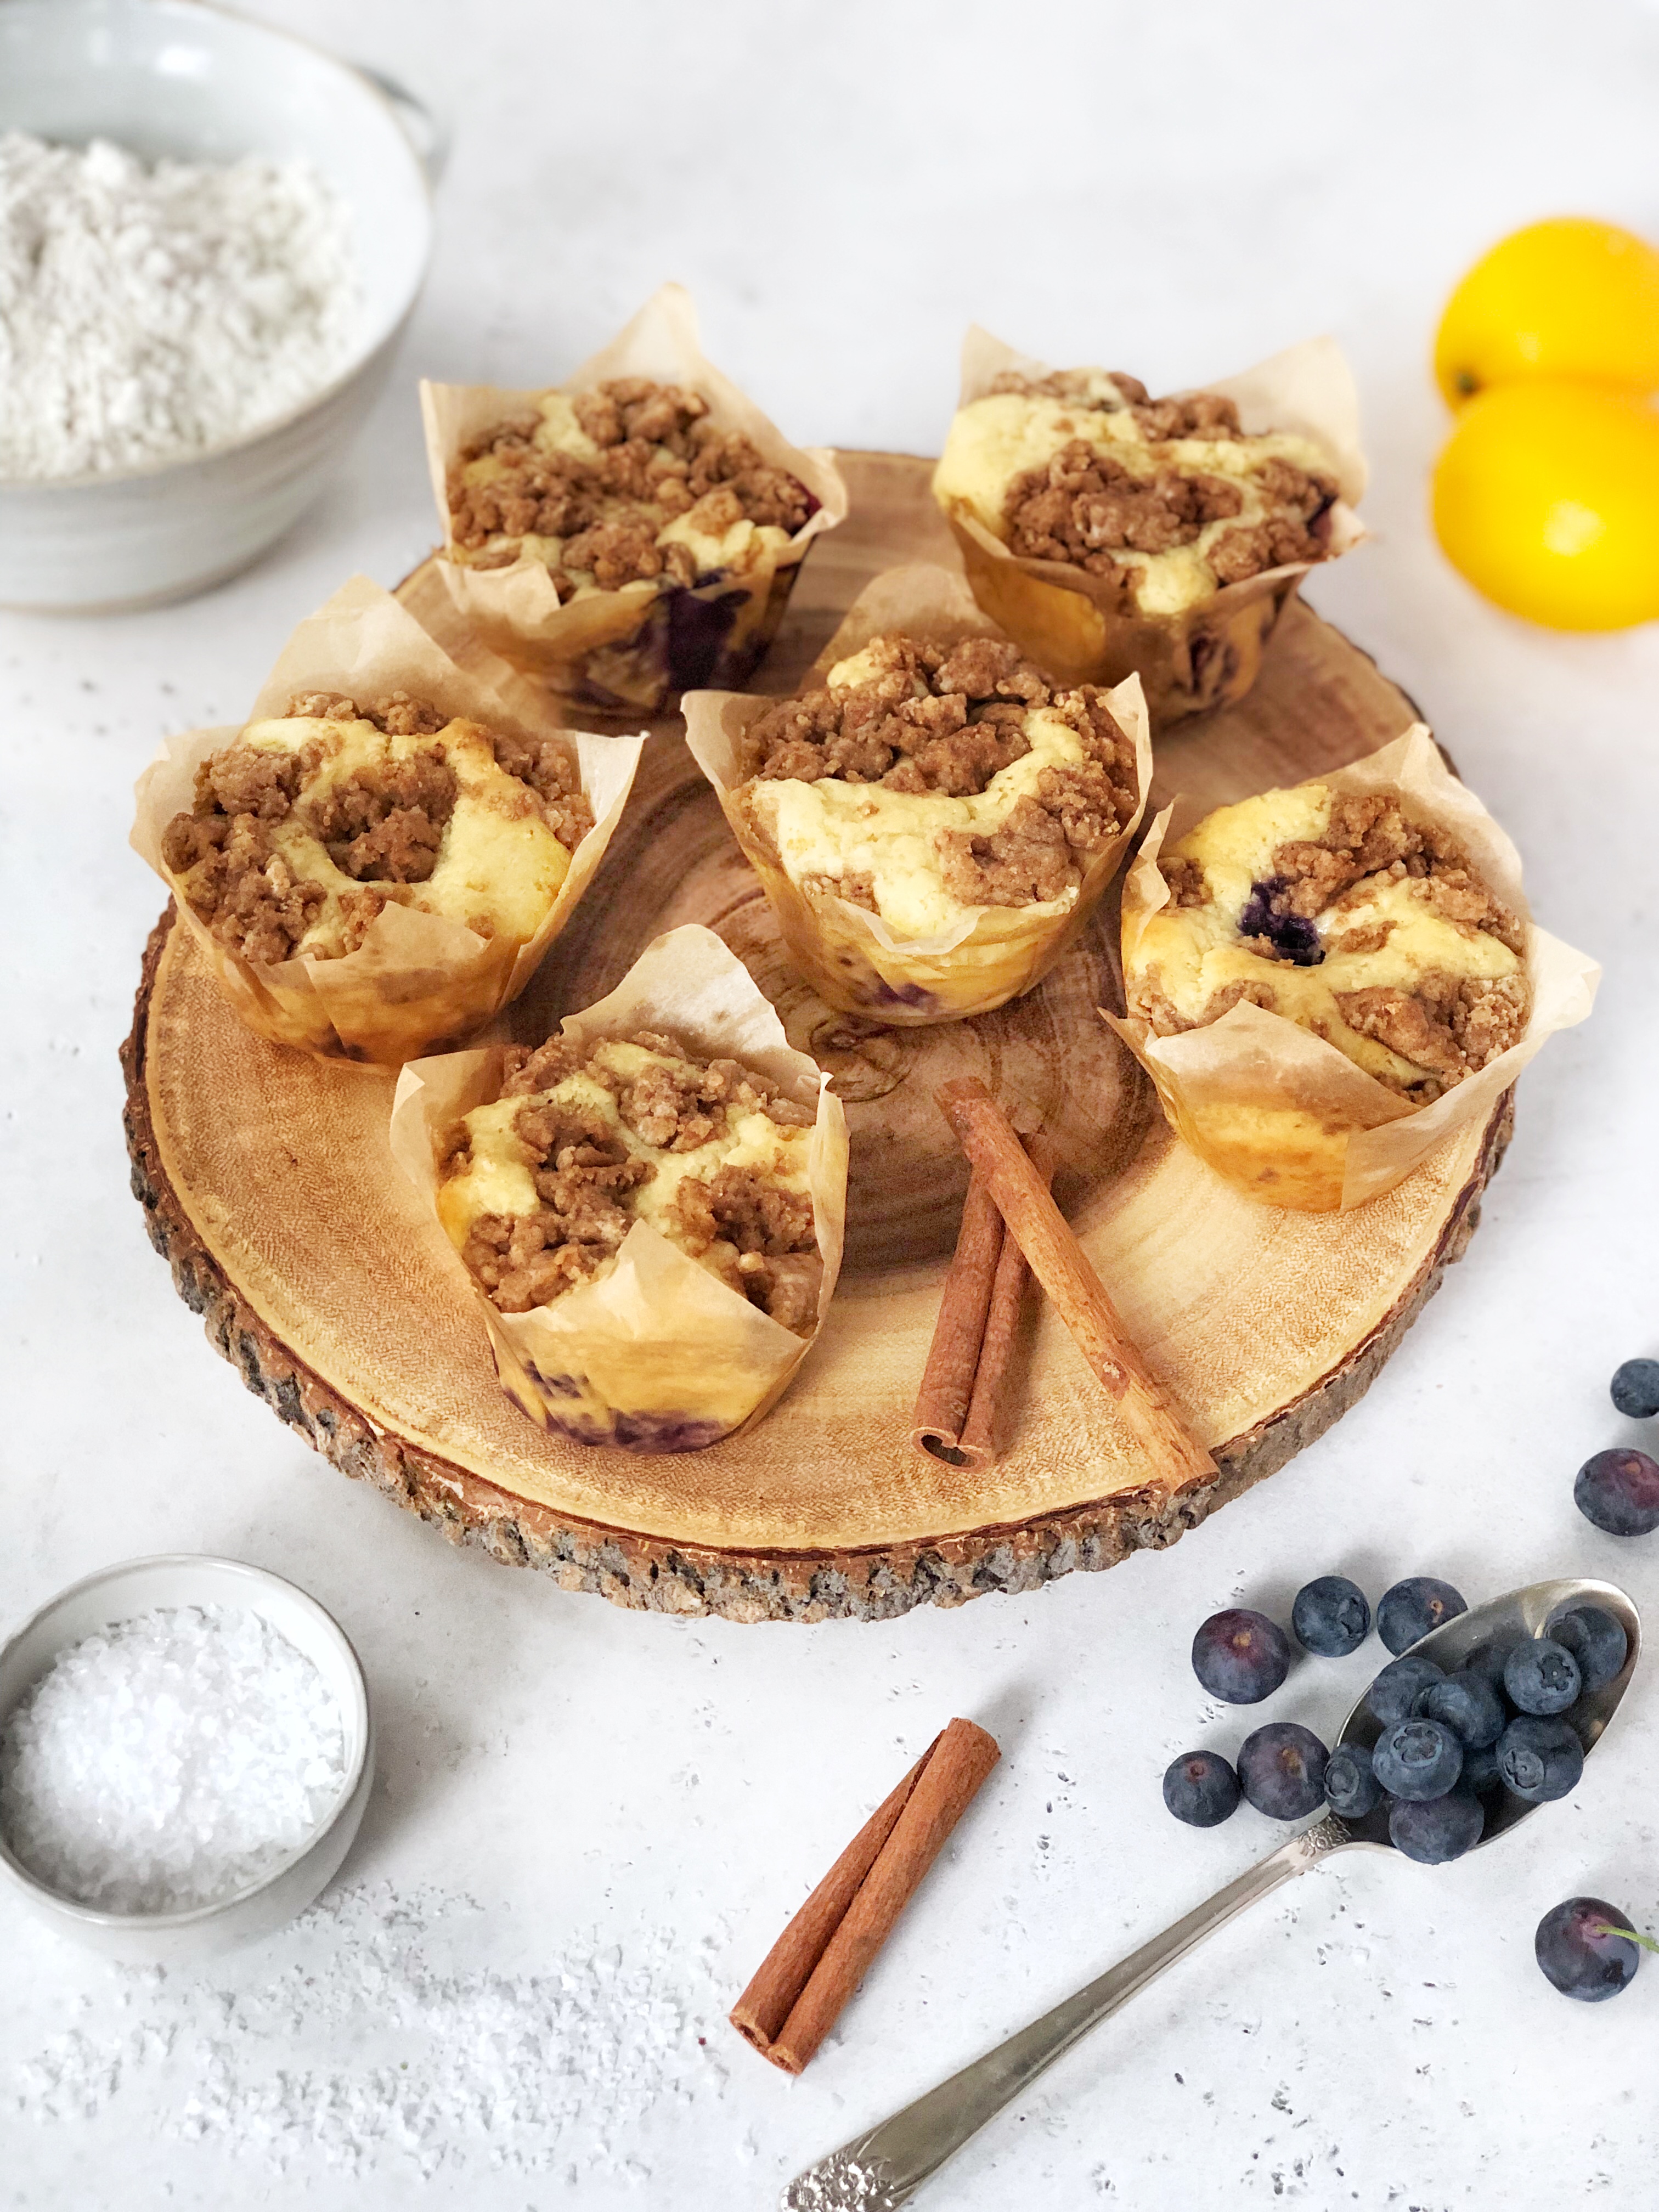 Blueberry Muffins with Cinnamon Streusel Topping that are gluten free by Fed & Full